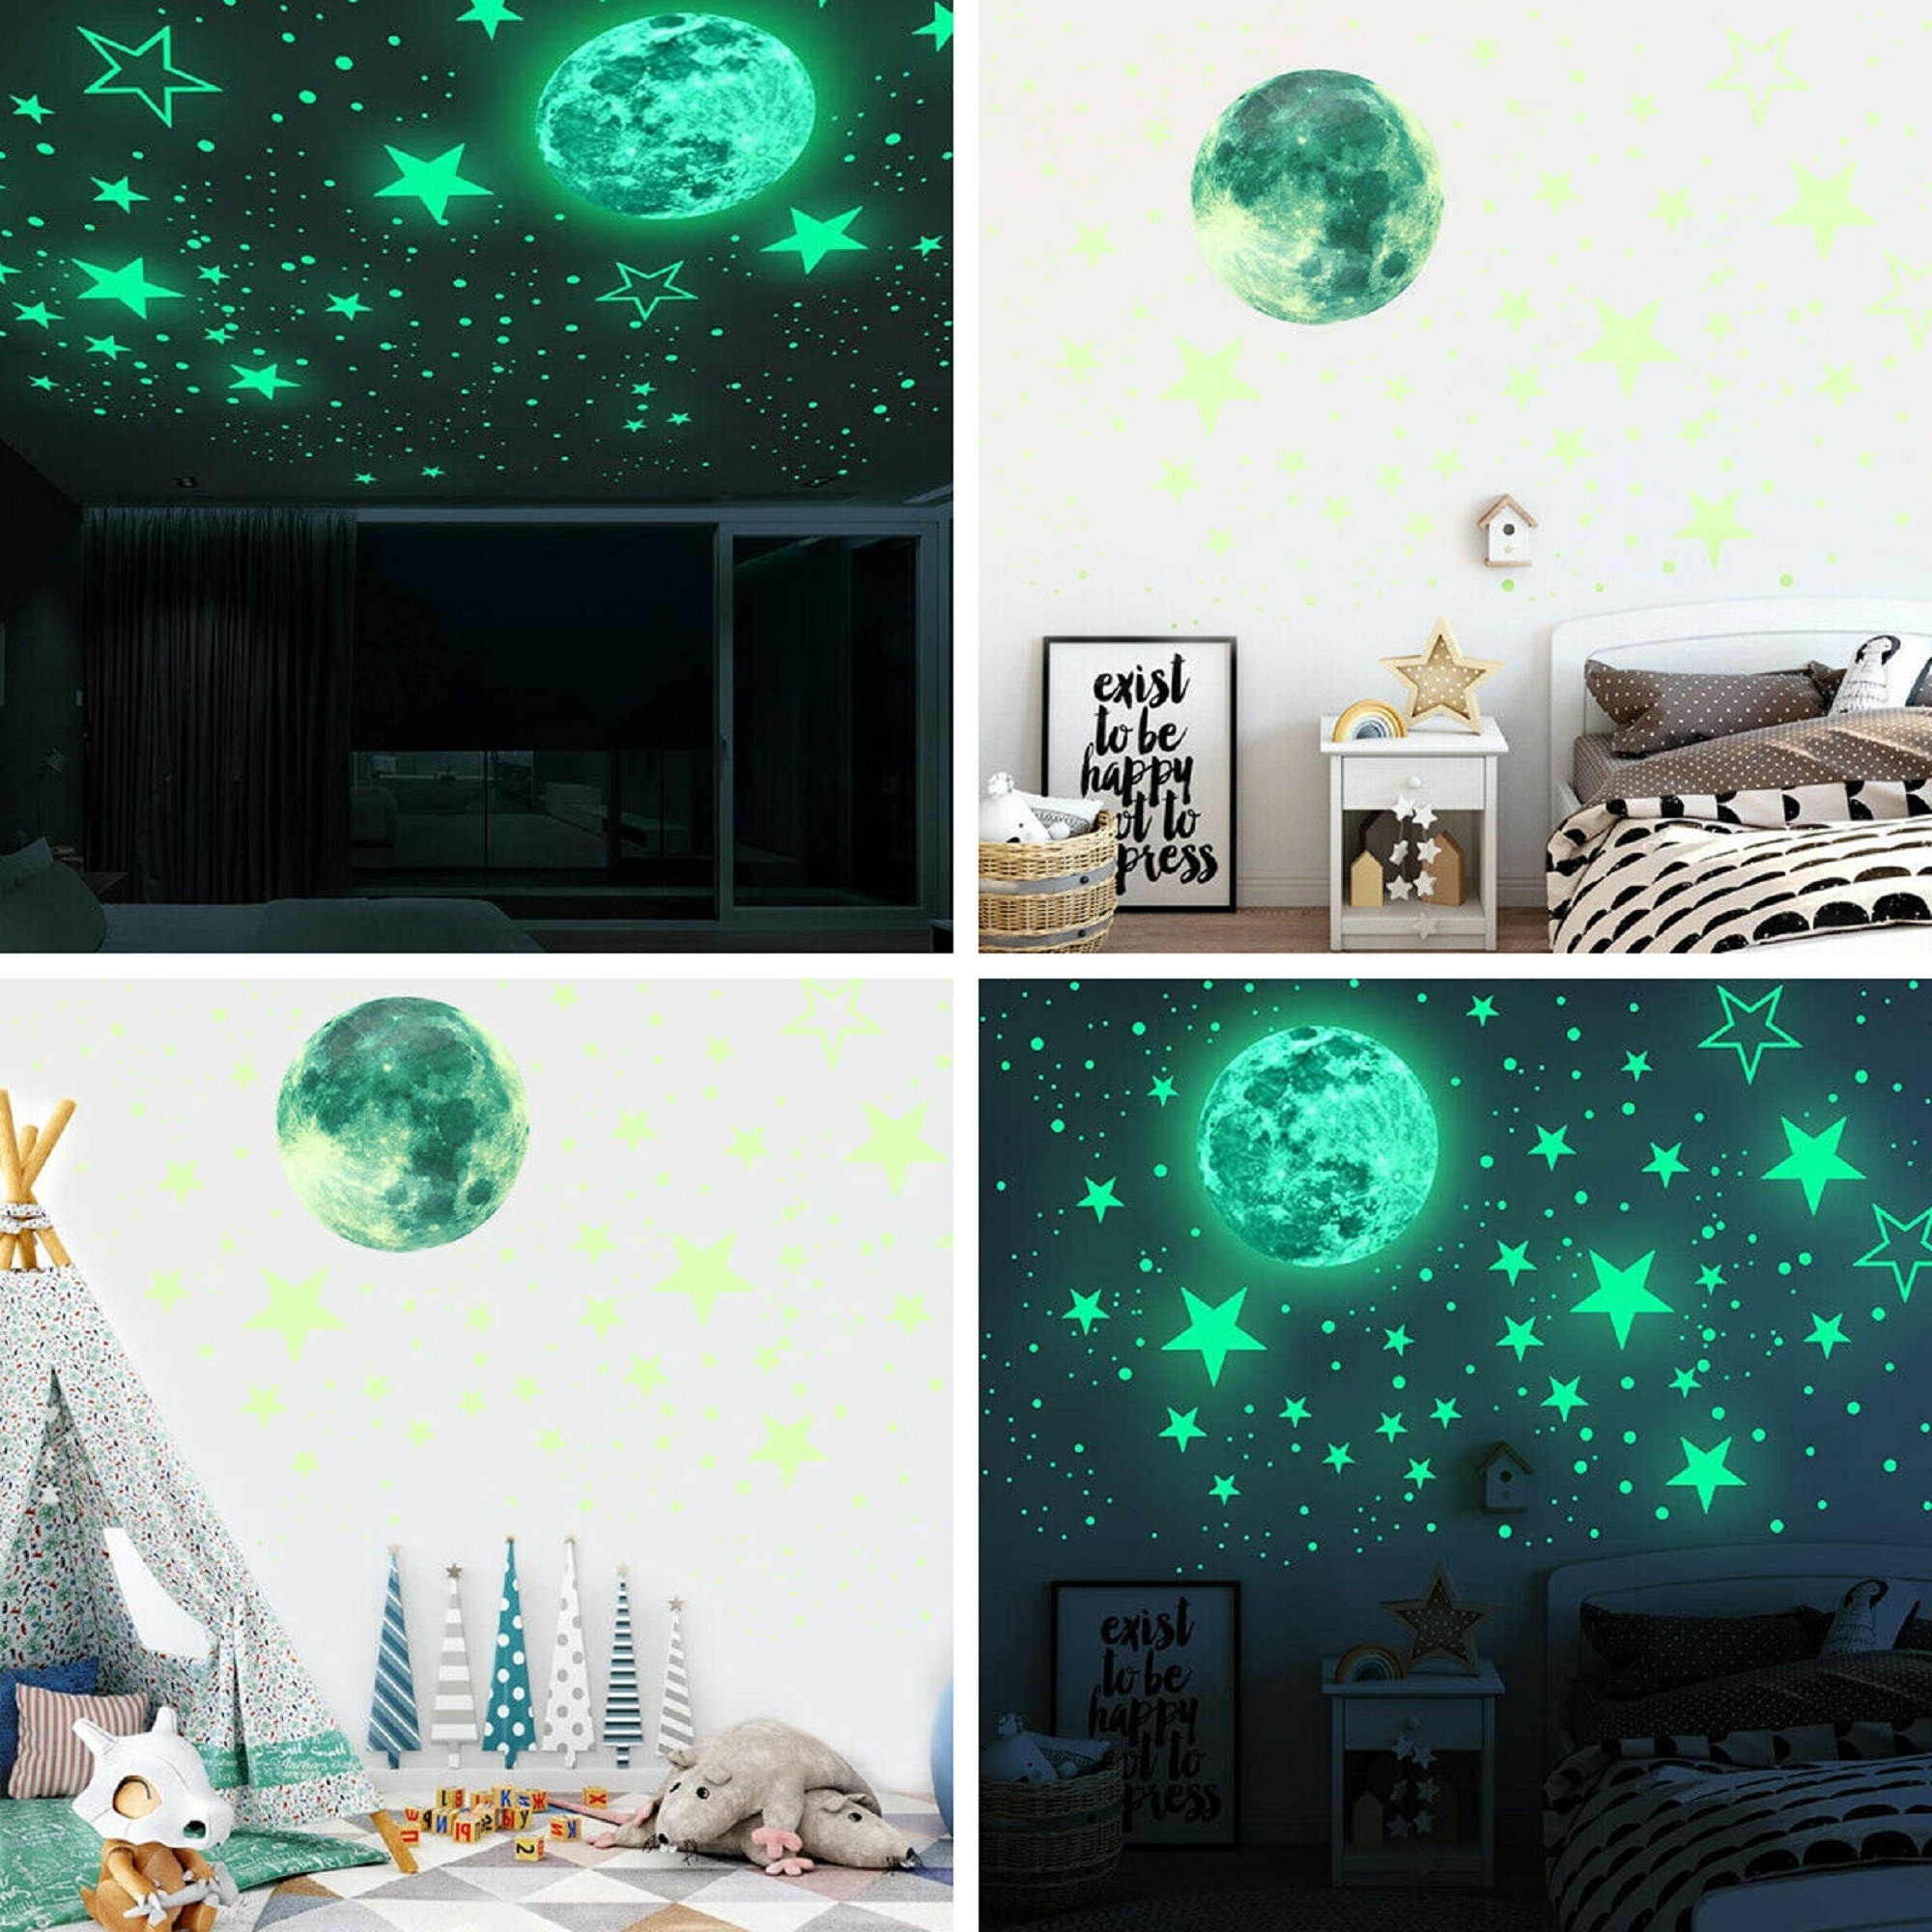 Glow in the Dark Stars, Space Themed Decor, Ceiling Stars, Wall Stickers  Kids, Galaxy Bedroom Decor, Wall Stickers Bedroom, Space Wall Decal 